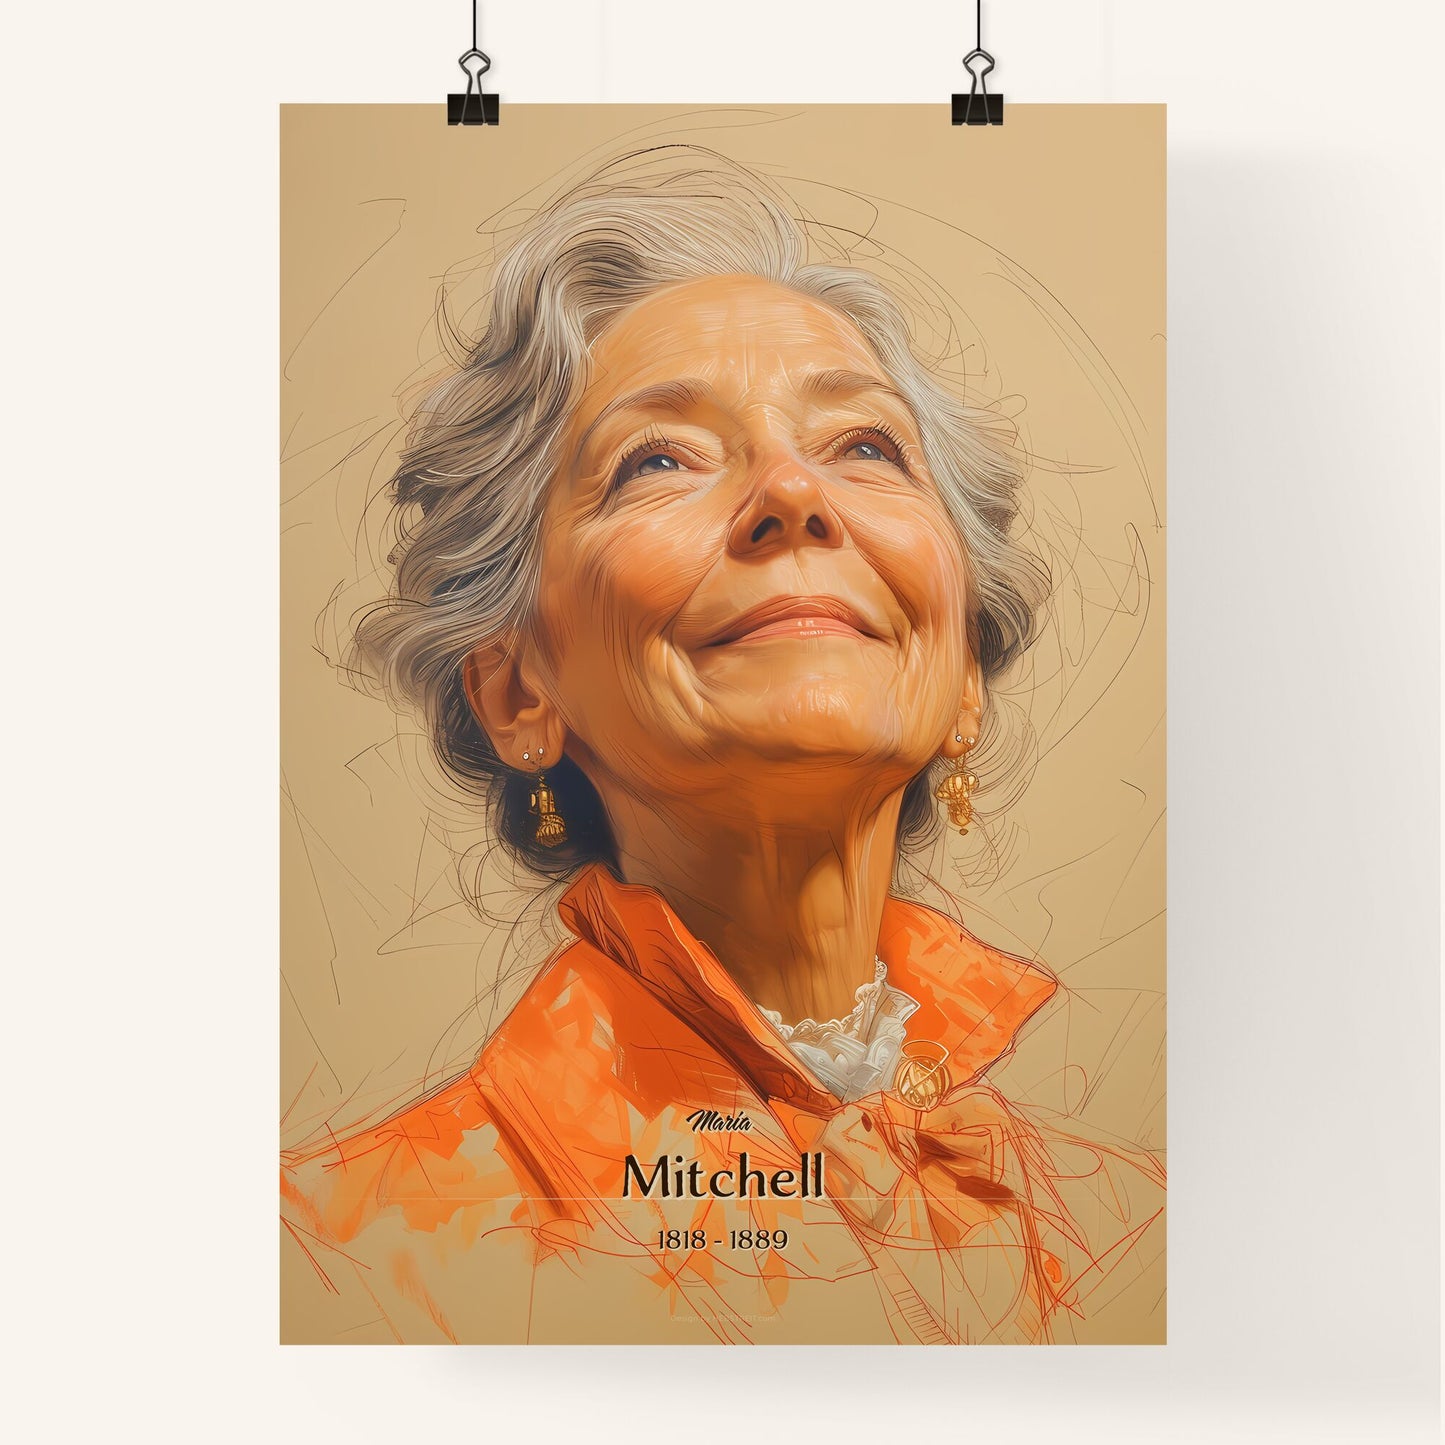 Maria, Mitchell, 1818 - 1889, A Poster of a woman smiling with a yellow shirt Default Title